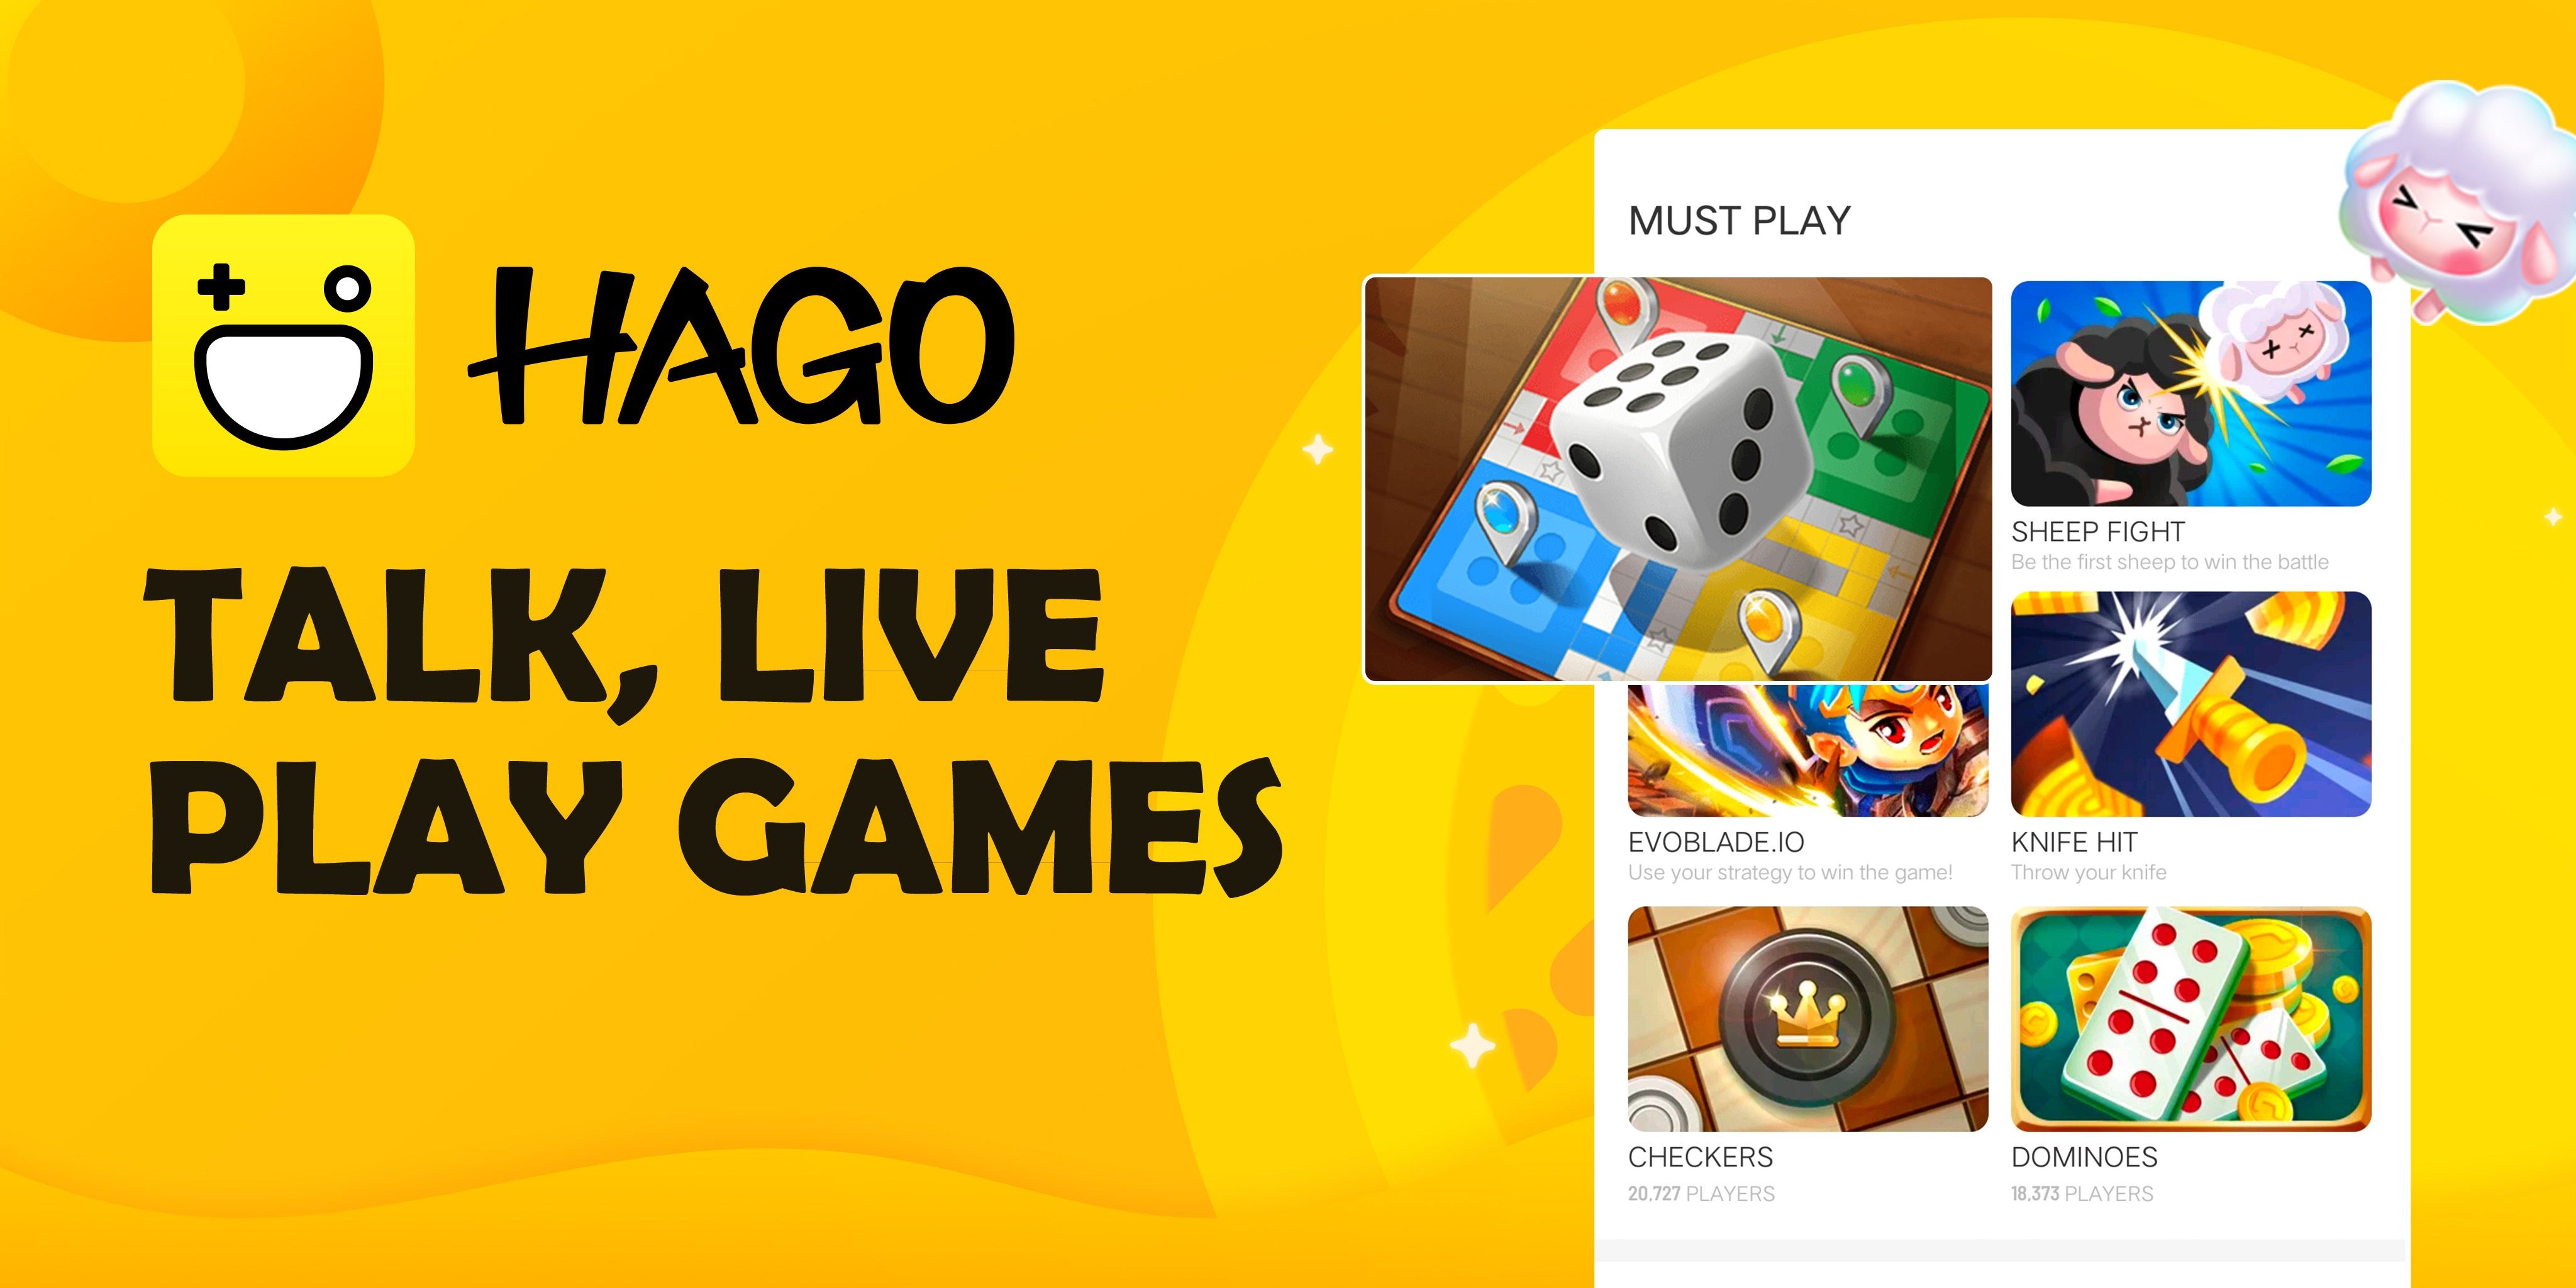 The landing page for the Hago app in the Google Play Store Is shown as an alternative to GamePigeon